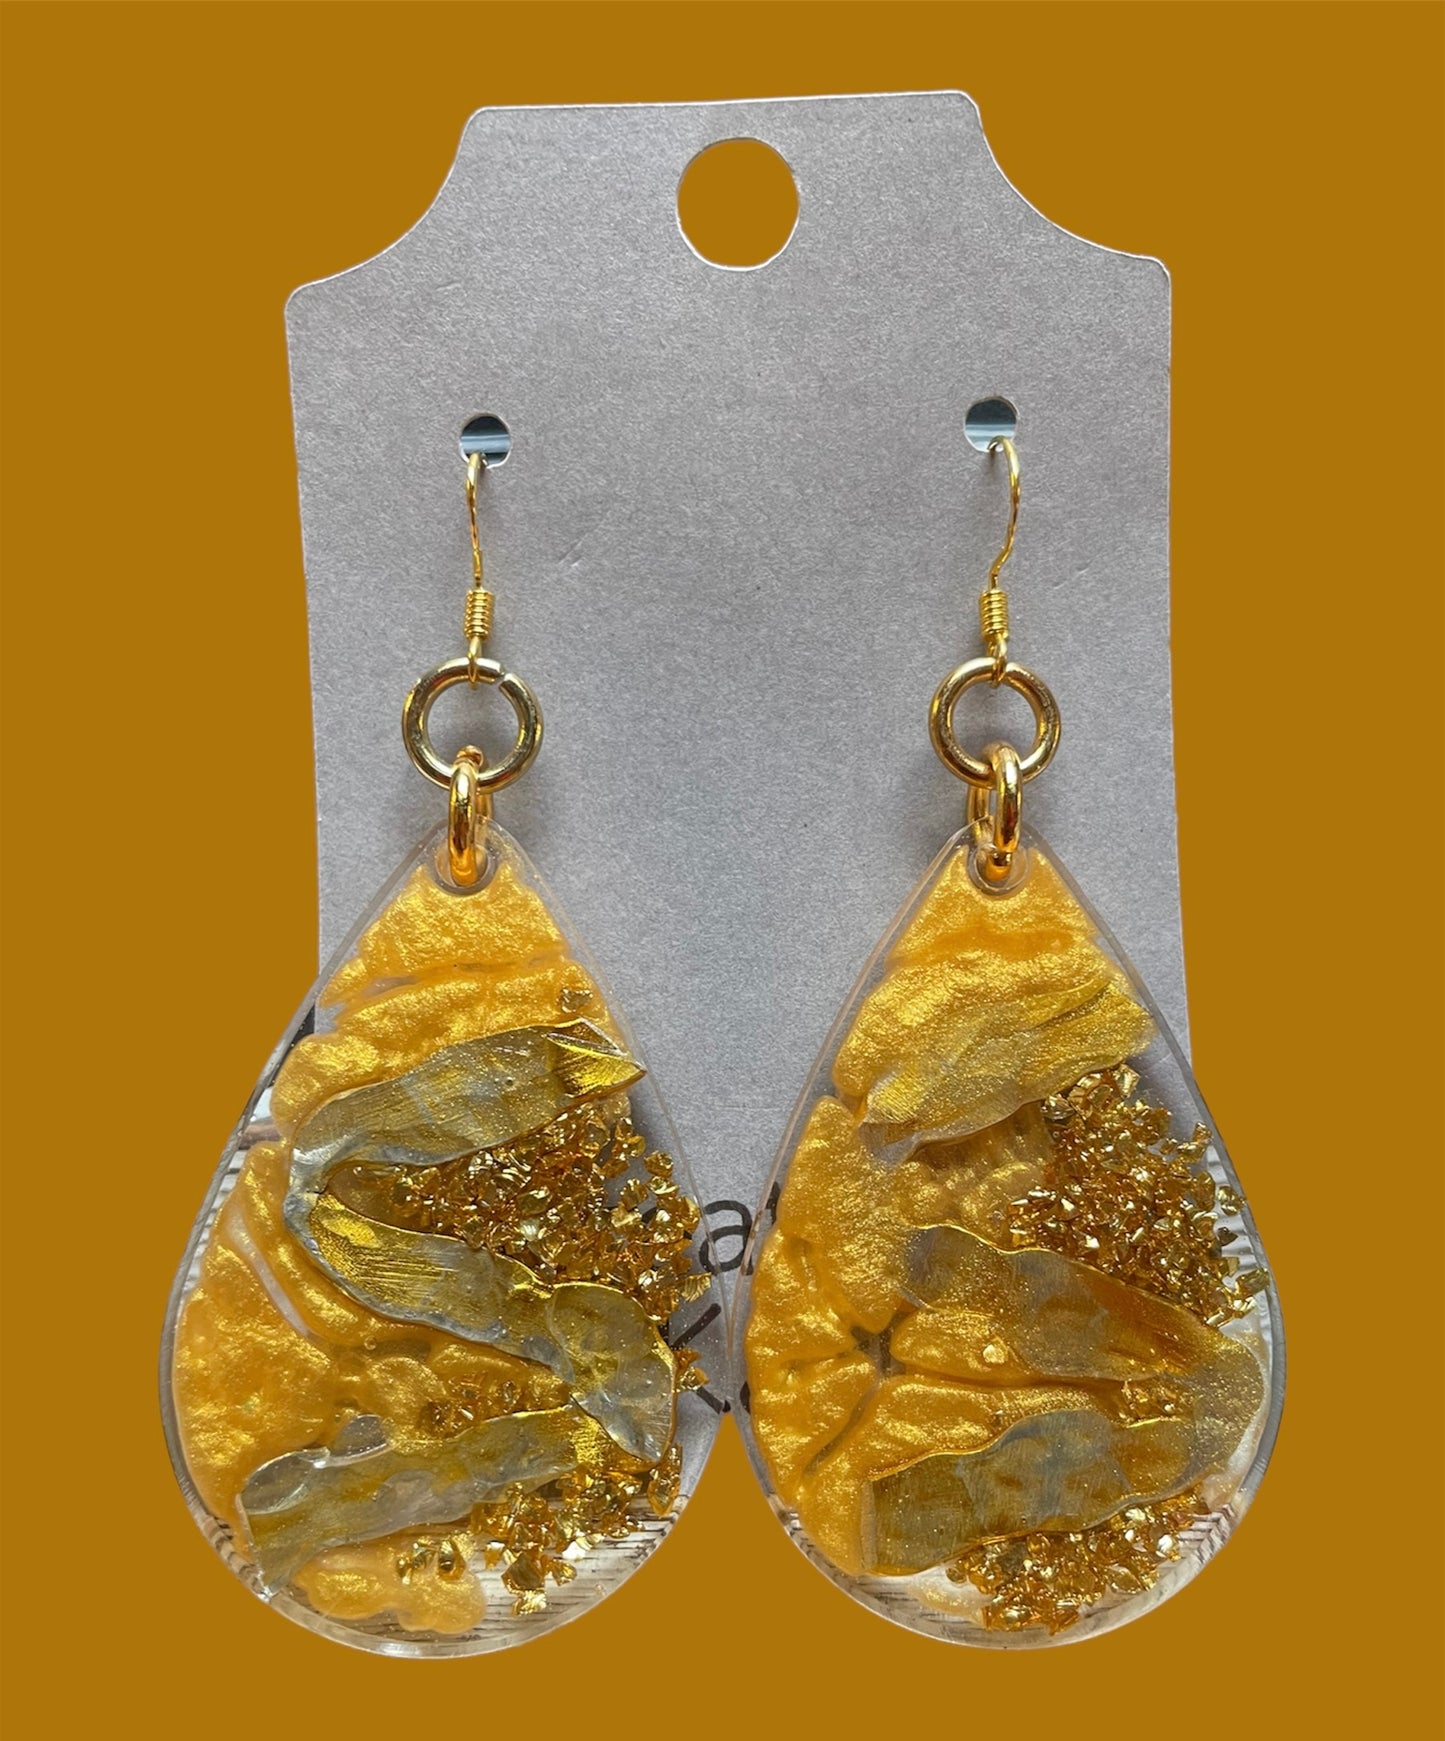 # 271 yellow and gold with metal resin earrings